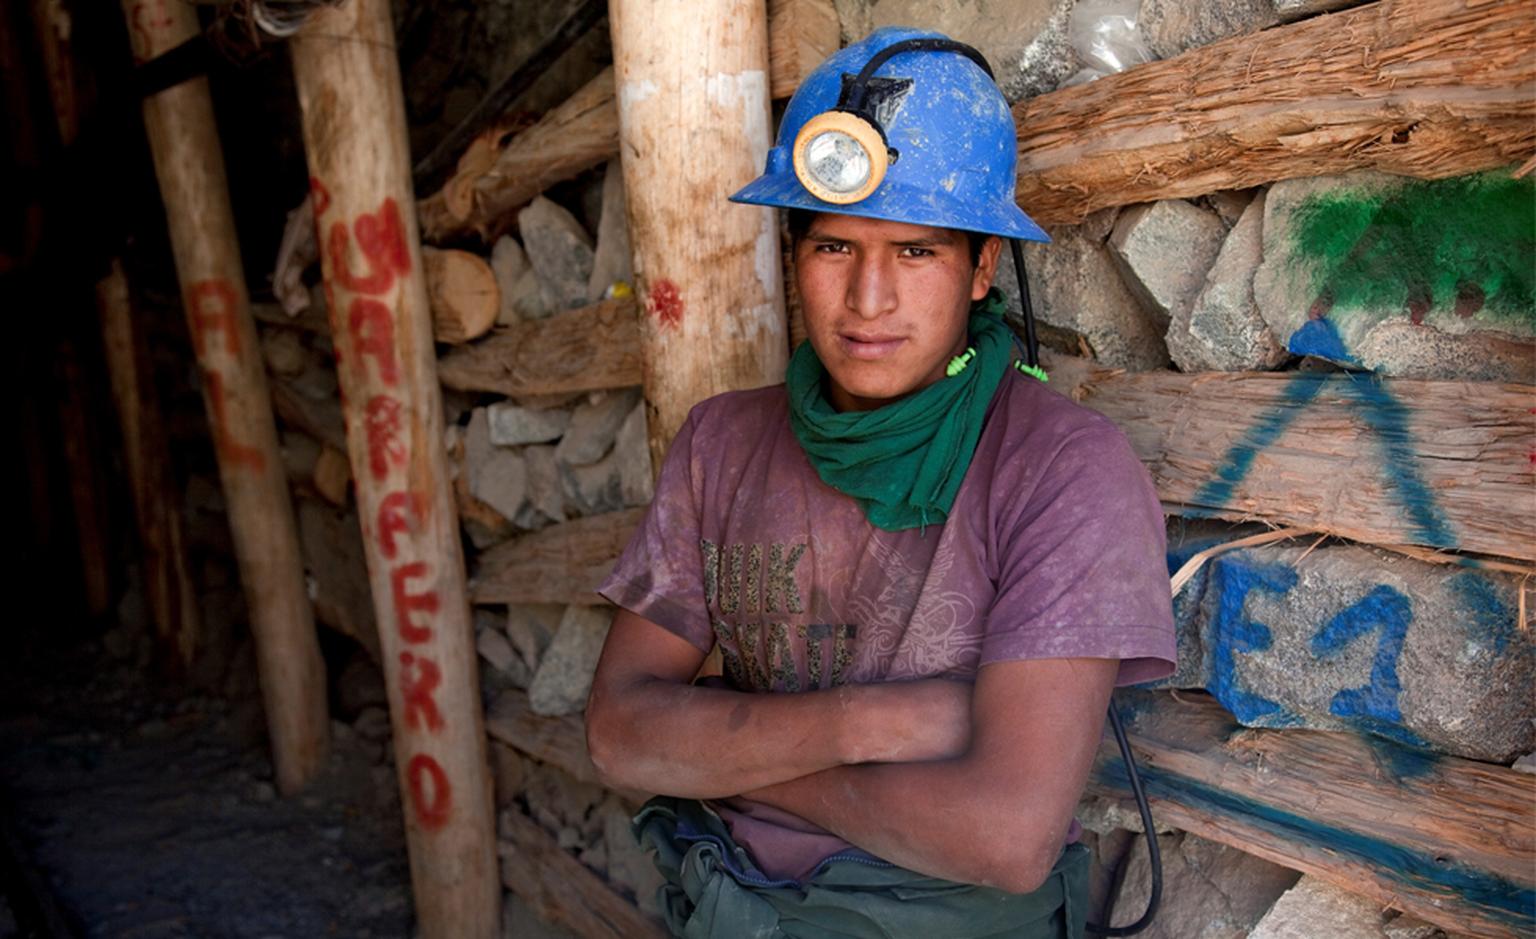 Miners at the entrance of a gold mine at Cuatro Horas in Peru. Fairtrade means better equipment and an investment in the community. Photo: Eduardo Martino